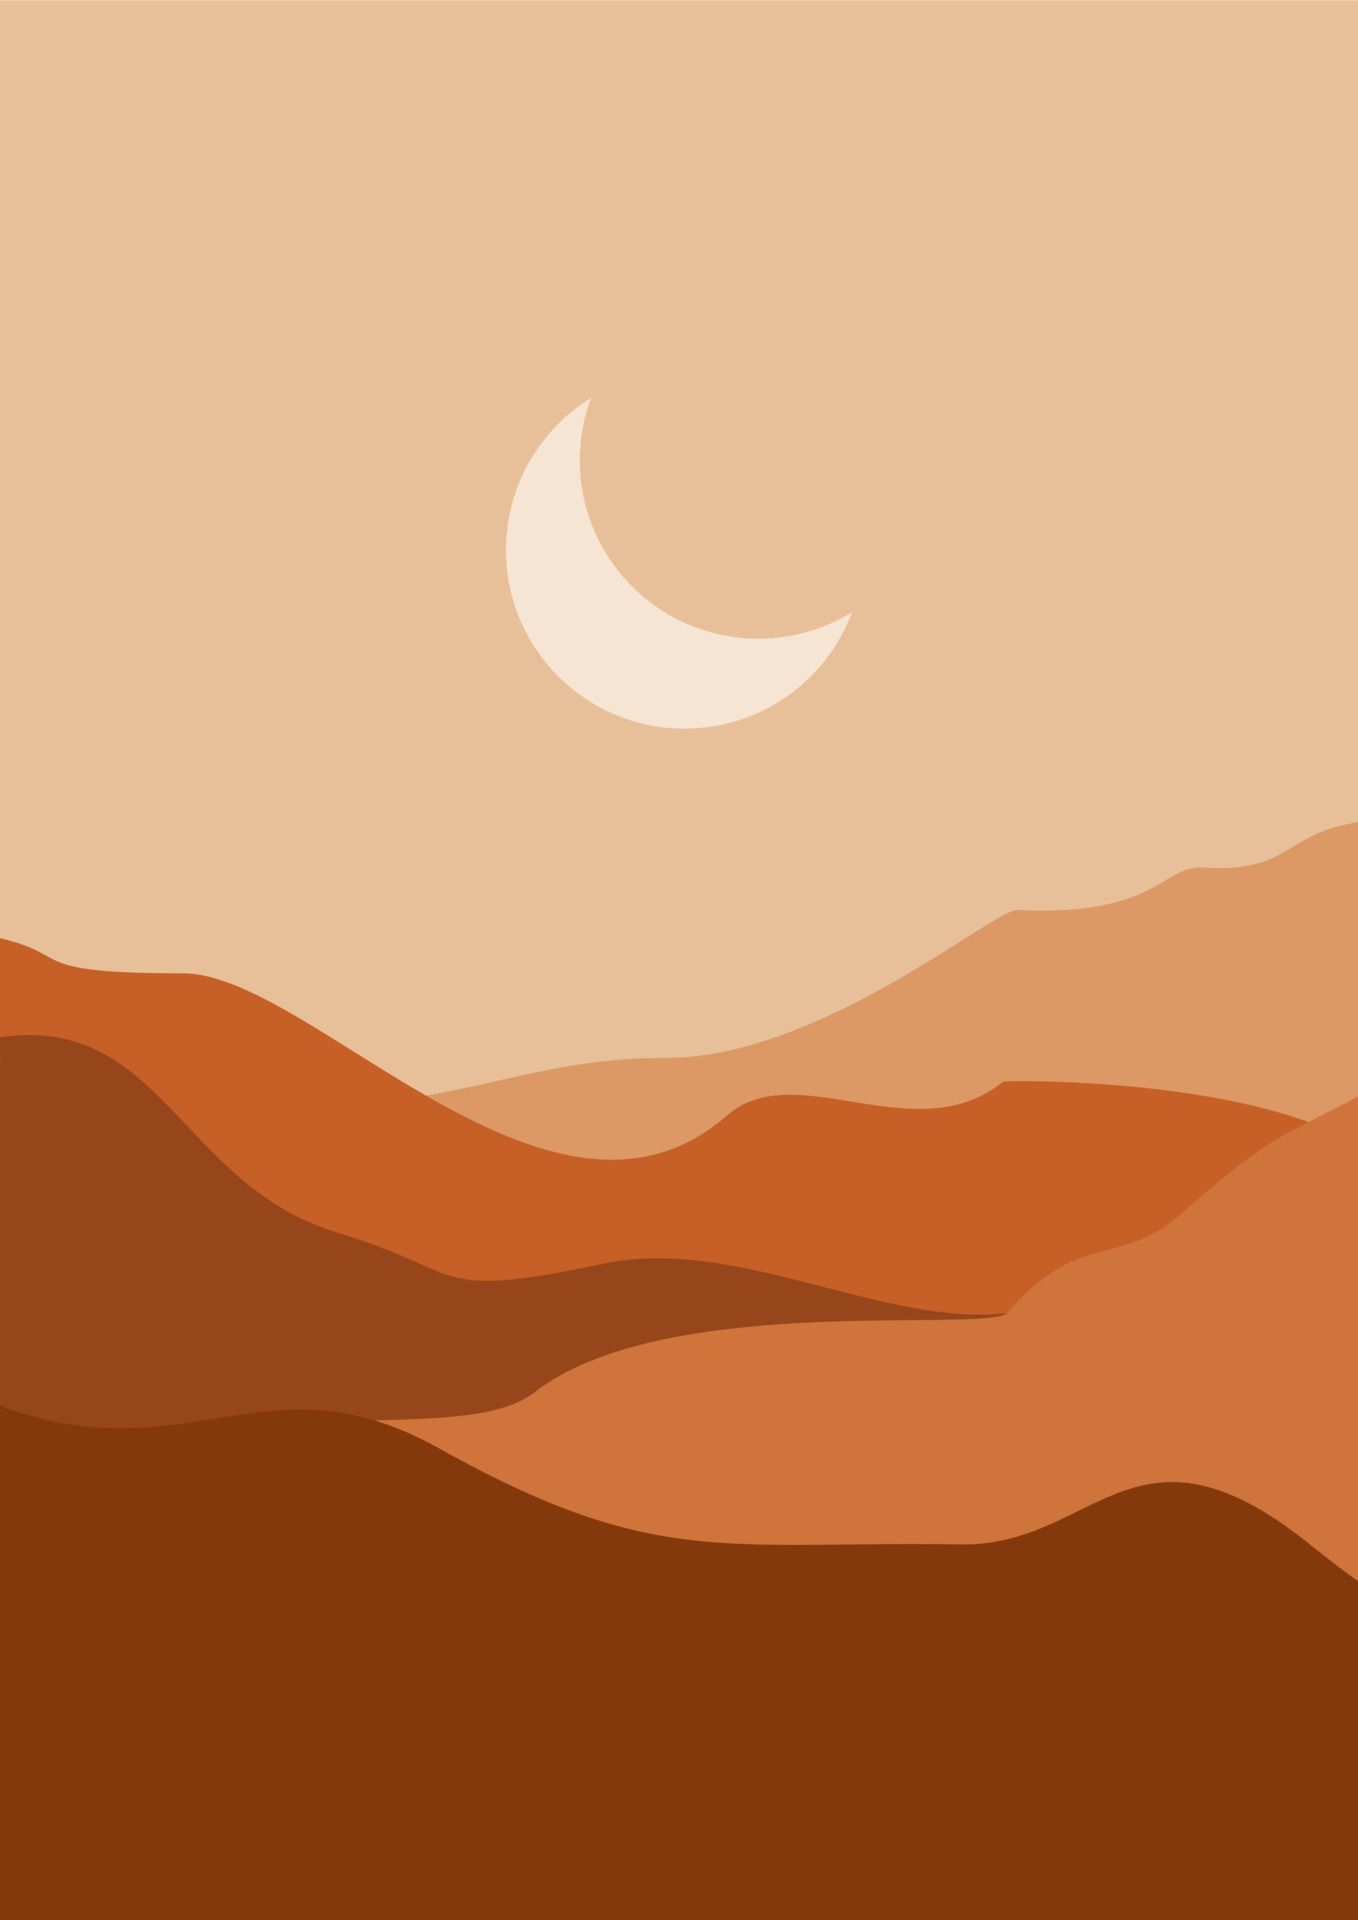 Abstract contemporary aesthetic background with desert, mountains, Sun. Earth tones, burnt orange, terracotta colors. Boho wall decor. landscapes set with sunrise, sunset. Earth tones, pastel colors